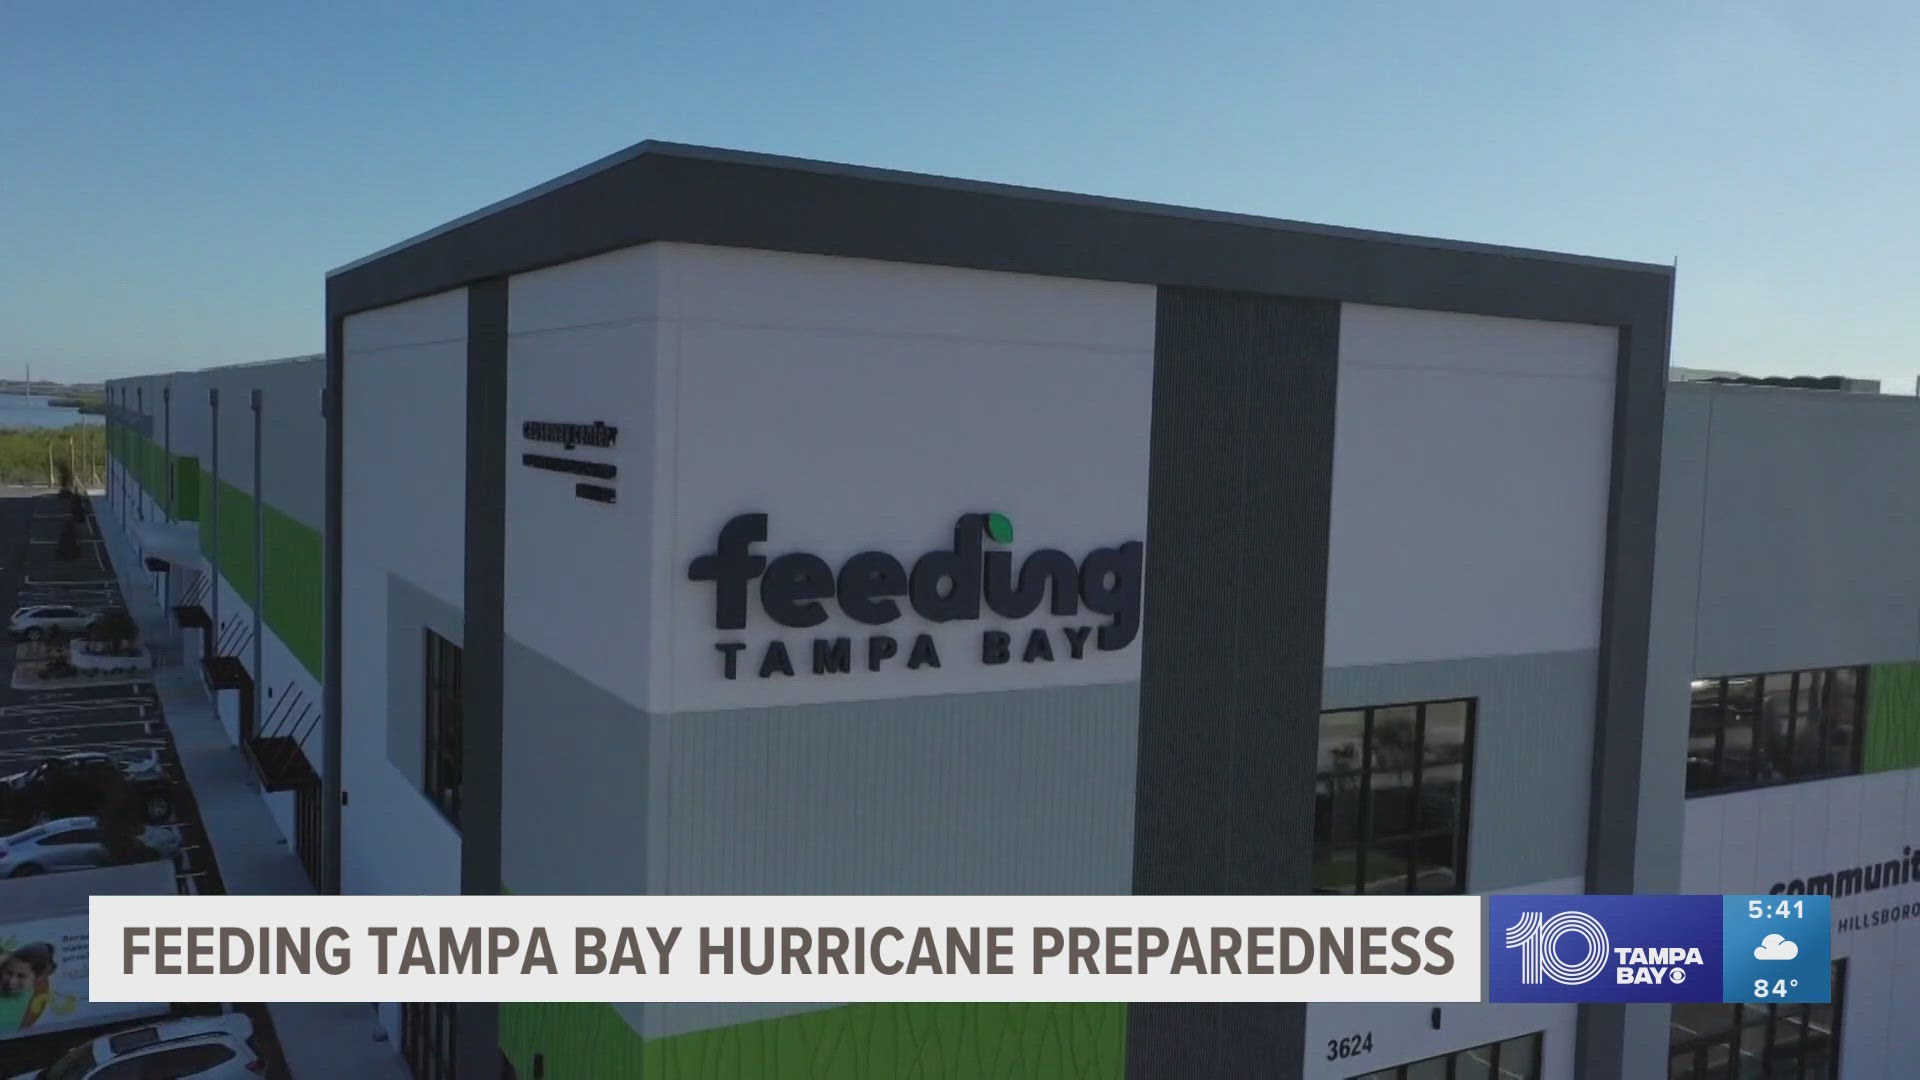 Feeding Tampa Bay, one of the largest food banks in the nation, says its new facility is built to withstand a Category 5 hurricane.